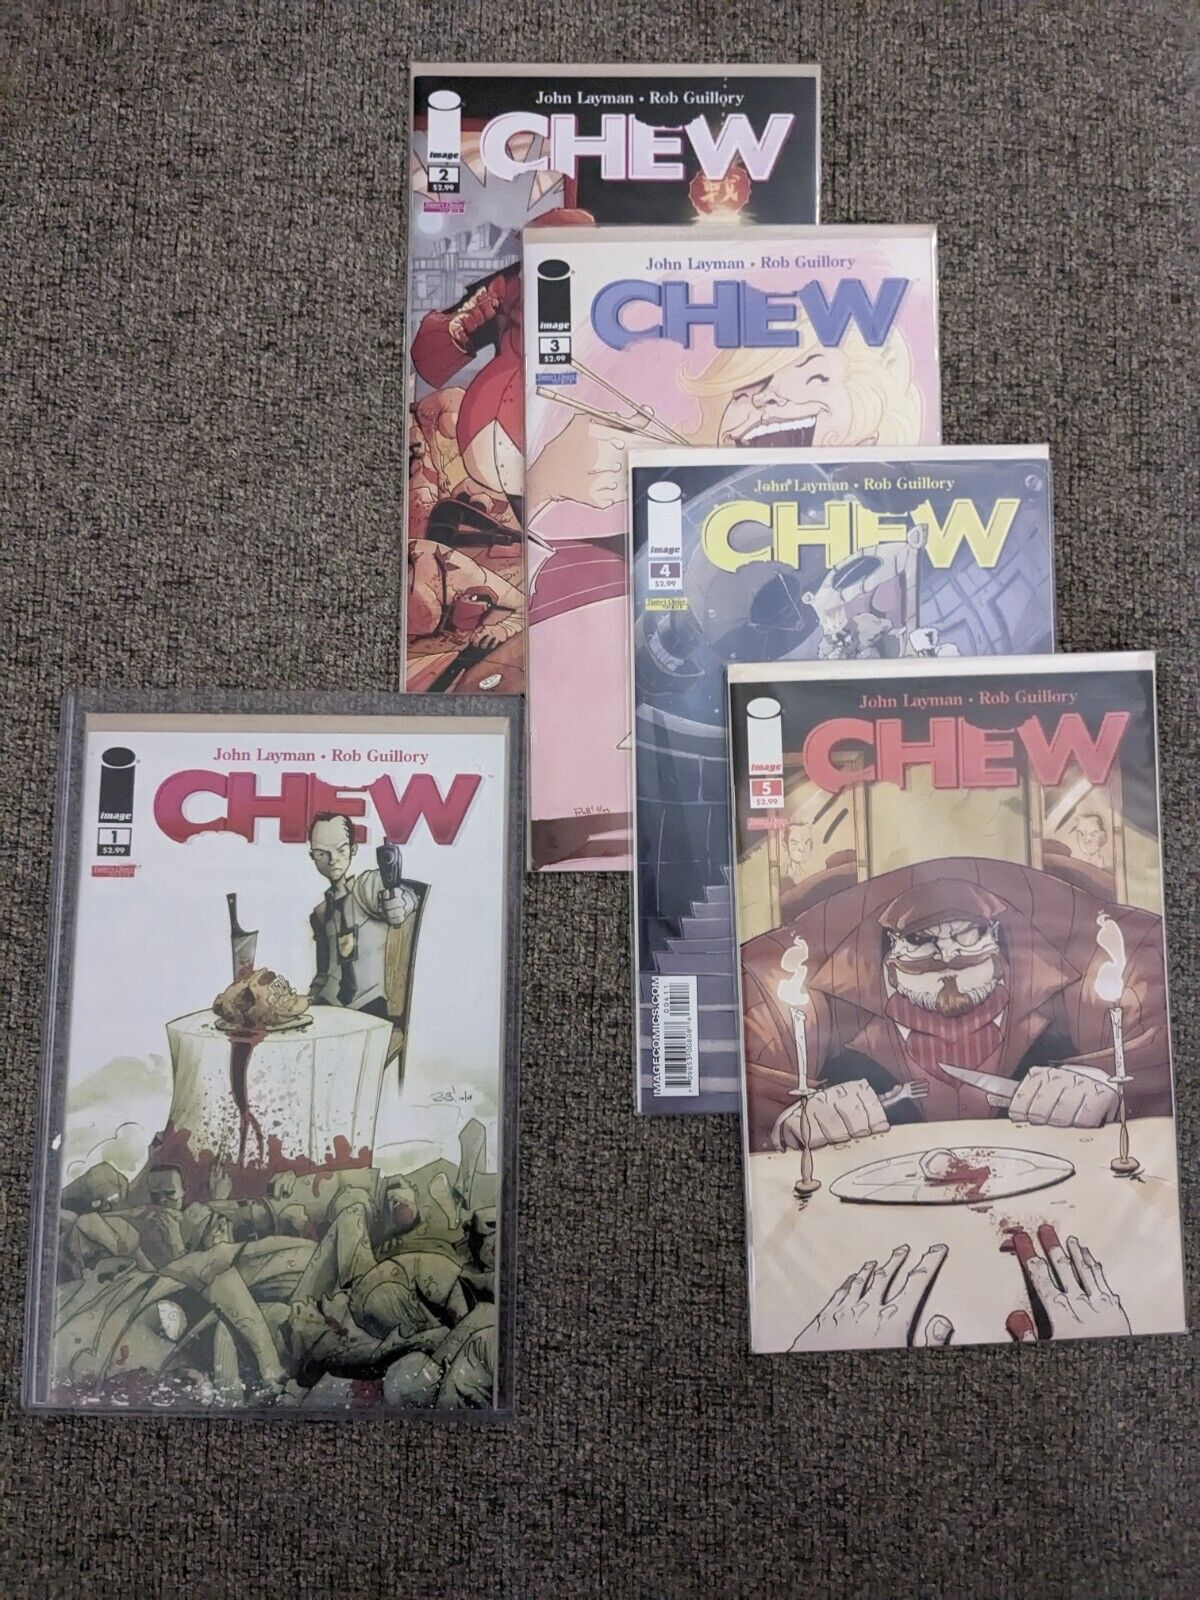 Chew #1 1st Print-Chew Comic Set Issues 1-5 All 1st Prints NM Condition